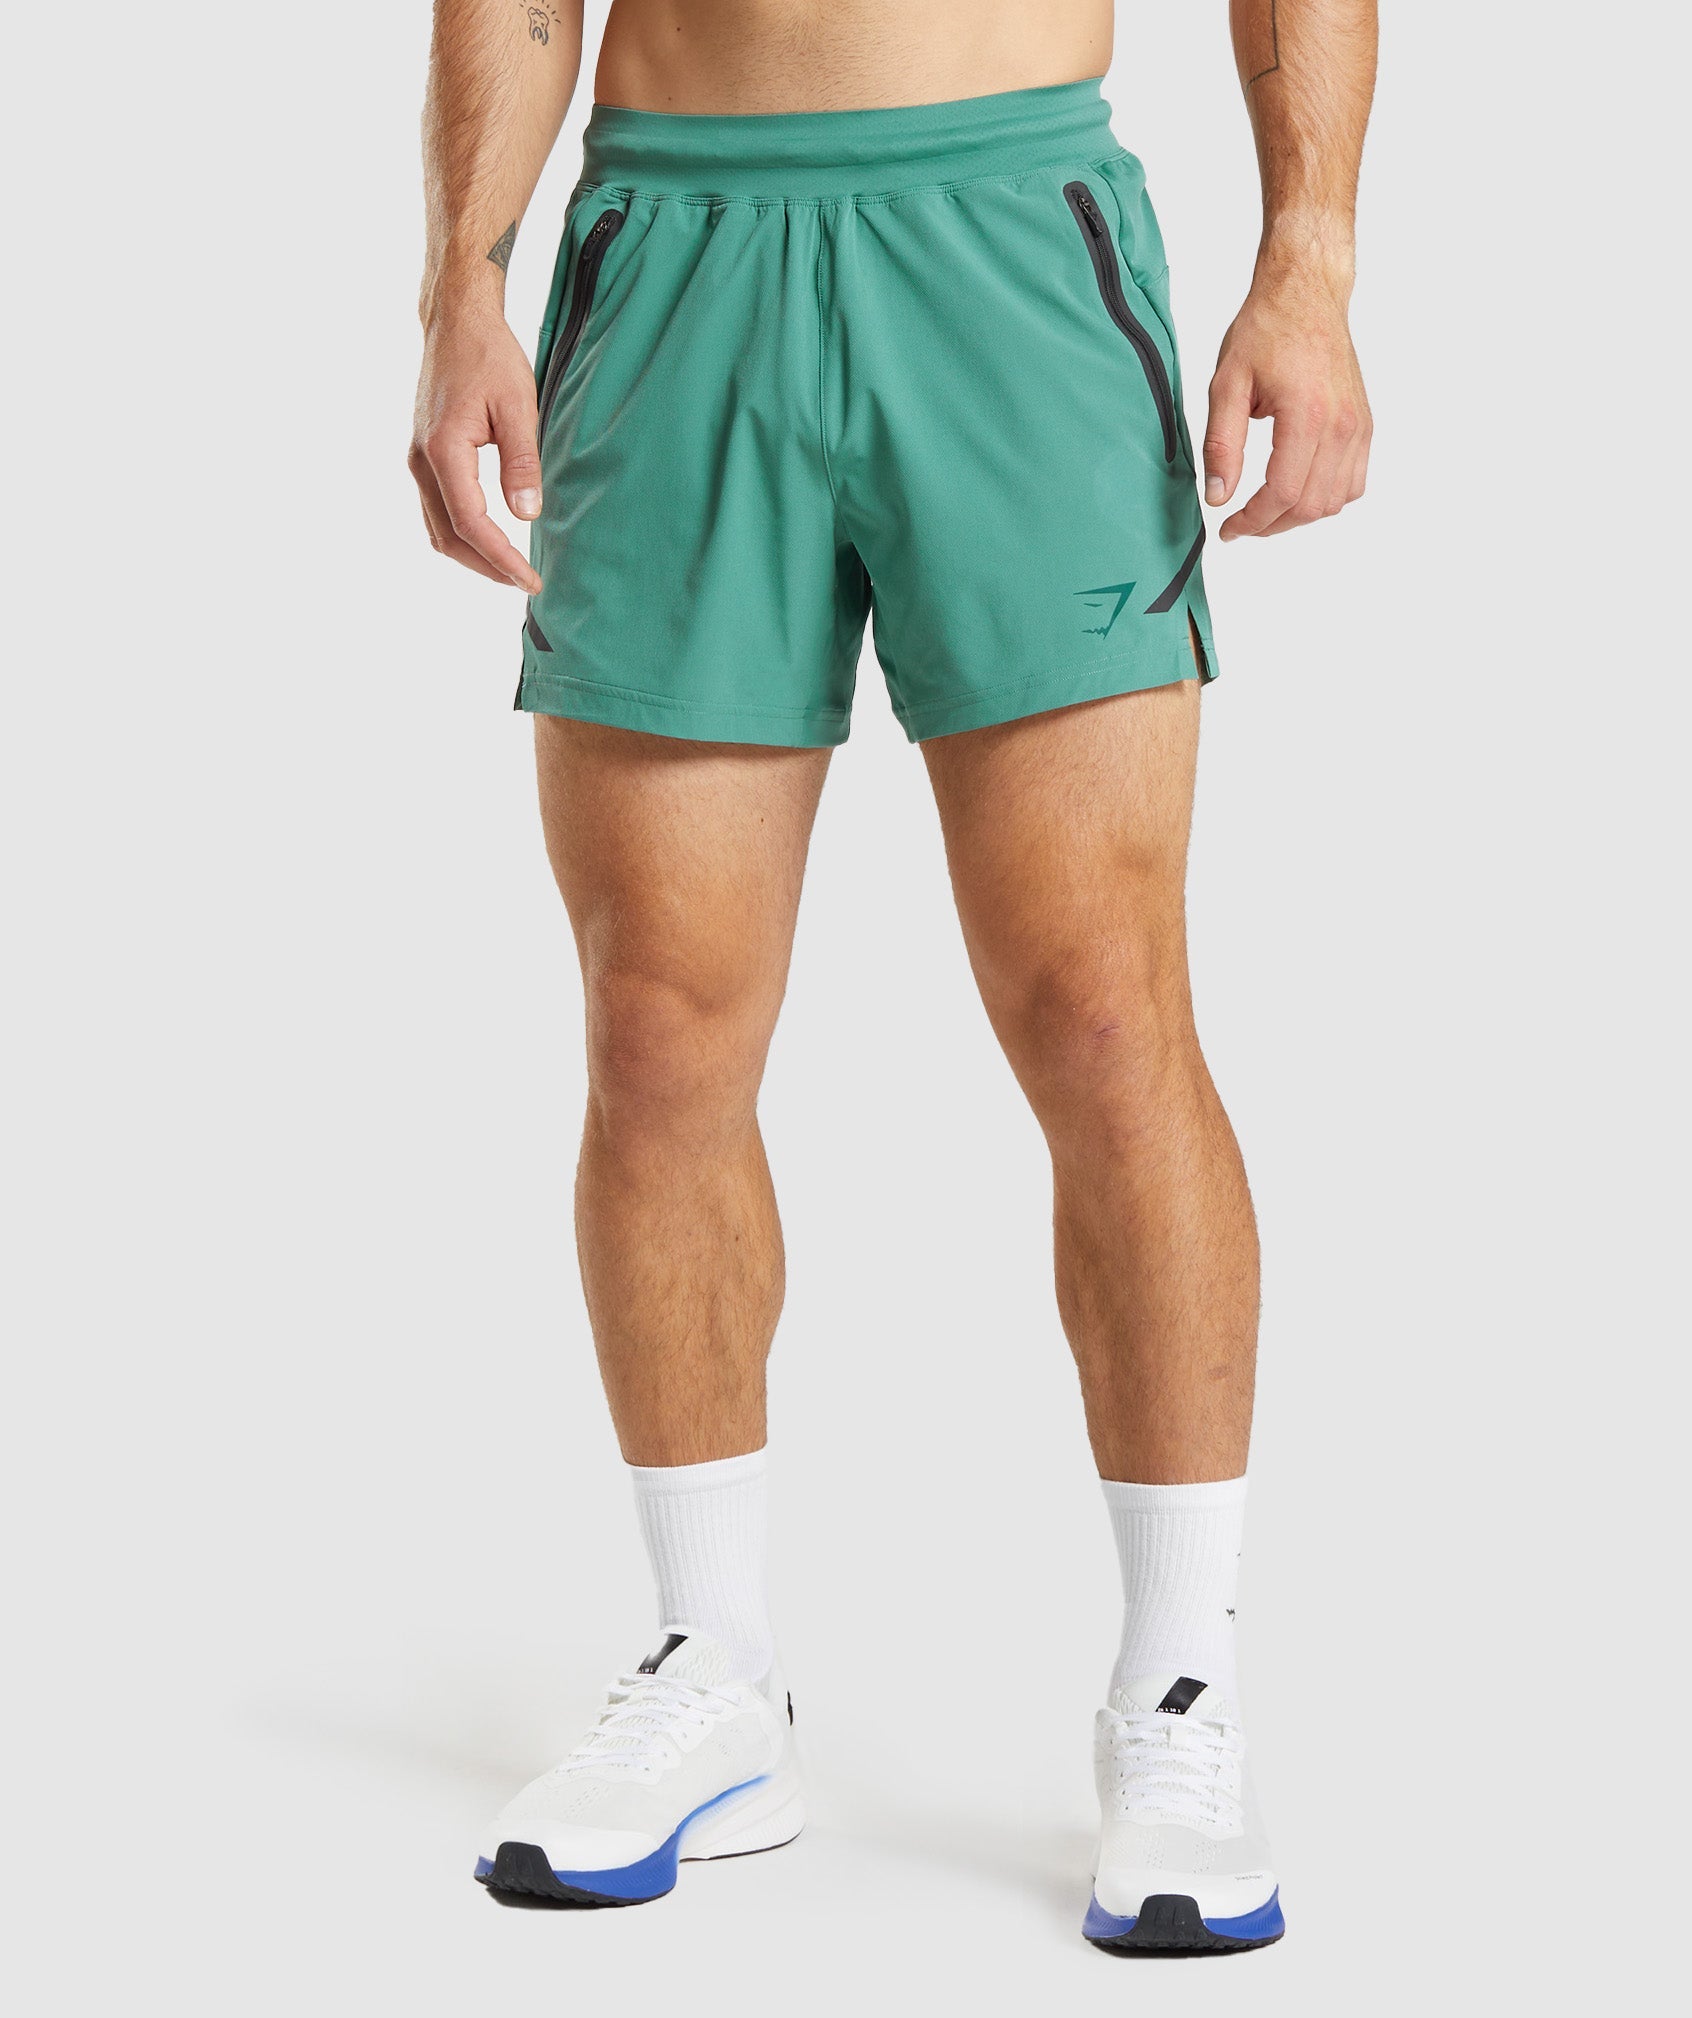 Apex 5" Perform Shorts in Hoya Green - view 1